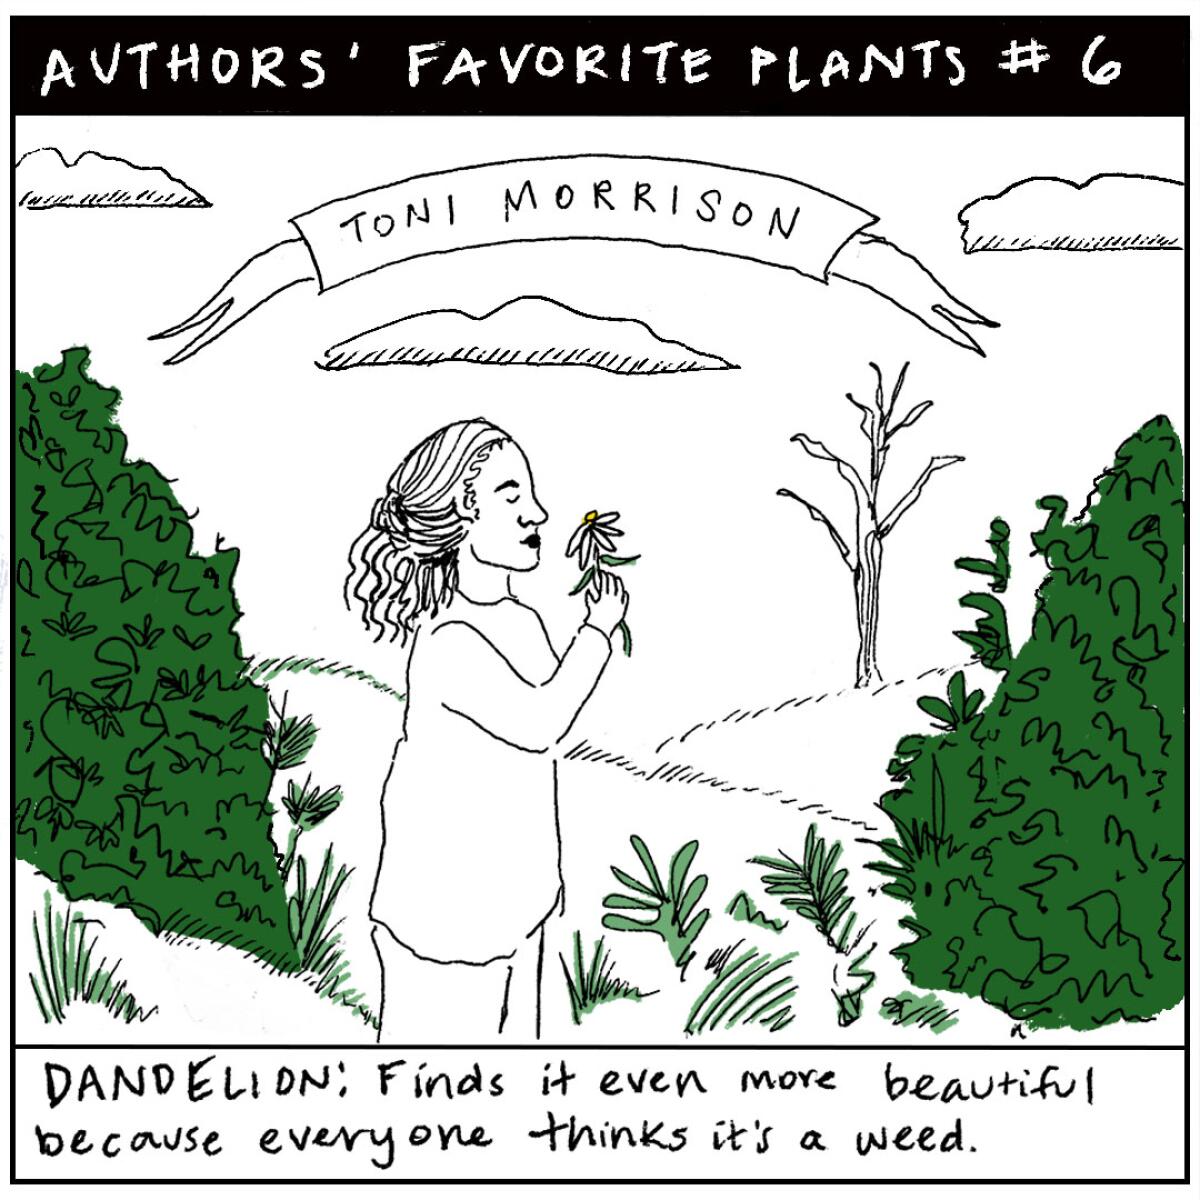 An illustration of a woman smelling a flower amid trees and other foliage. 